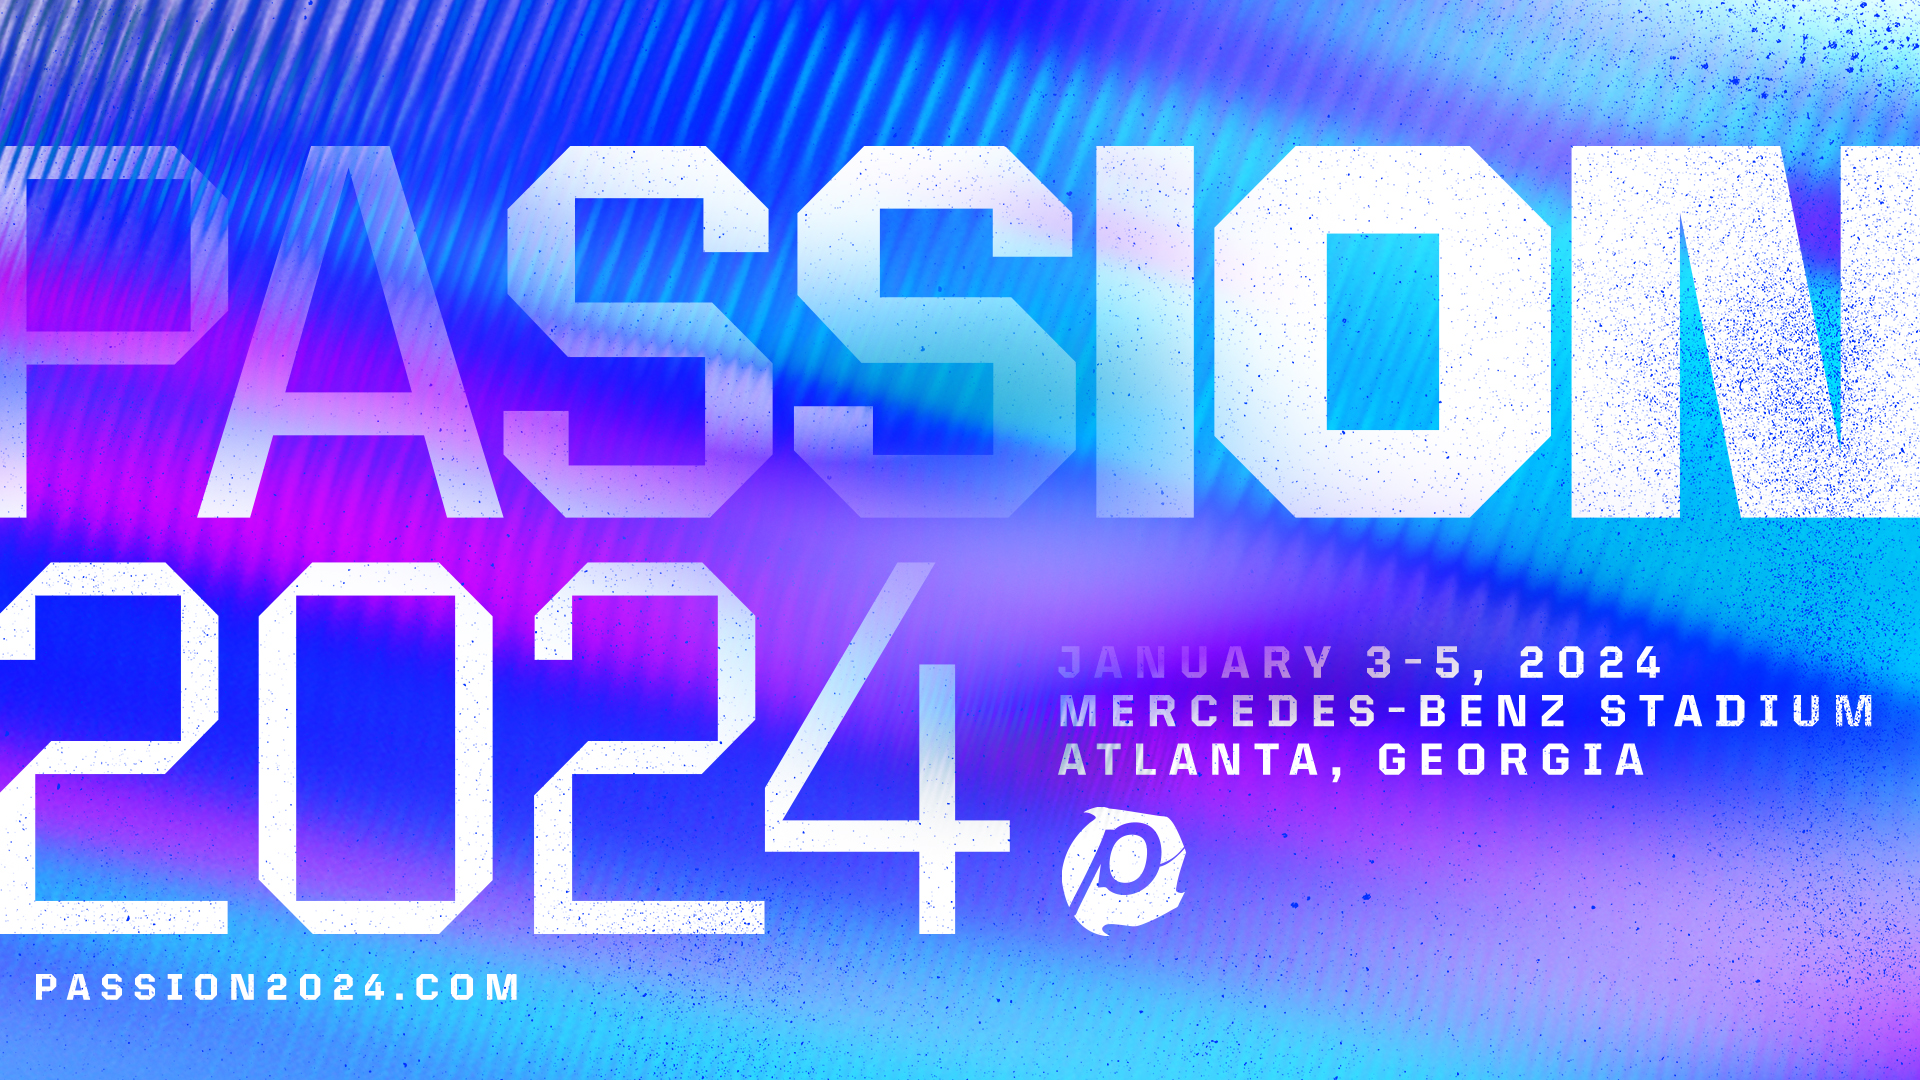 Passion 2024 Conference Schedule Caresa Sisile